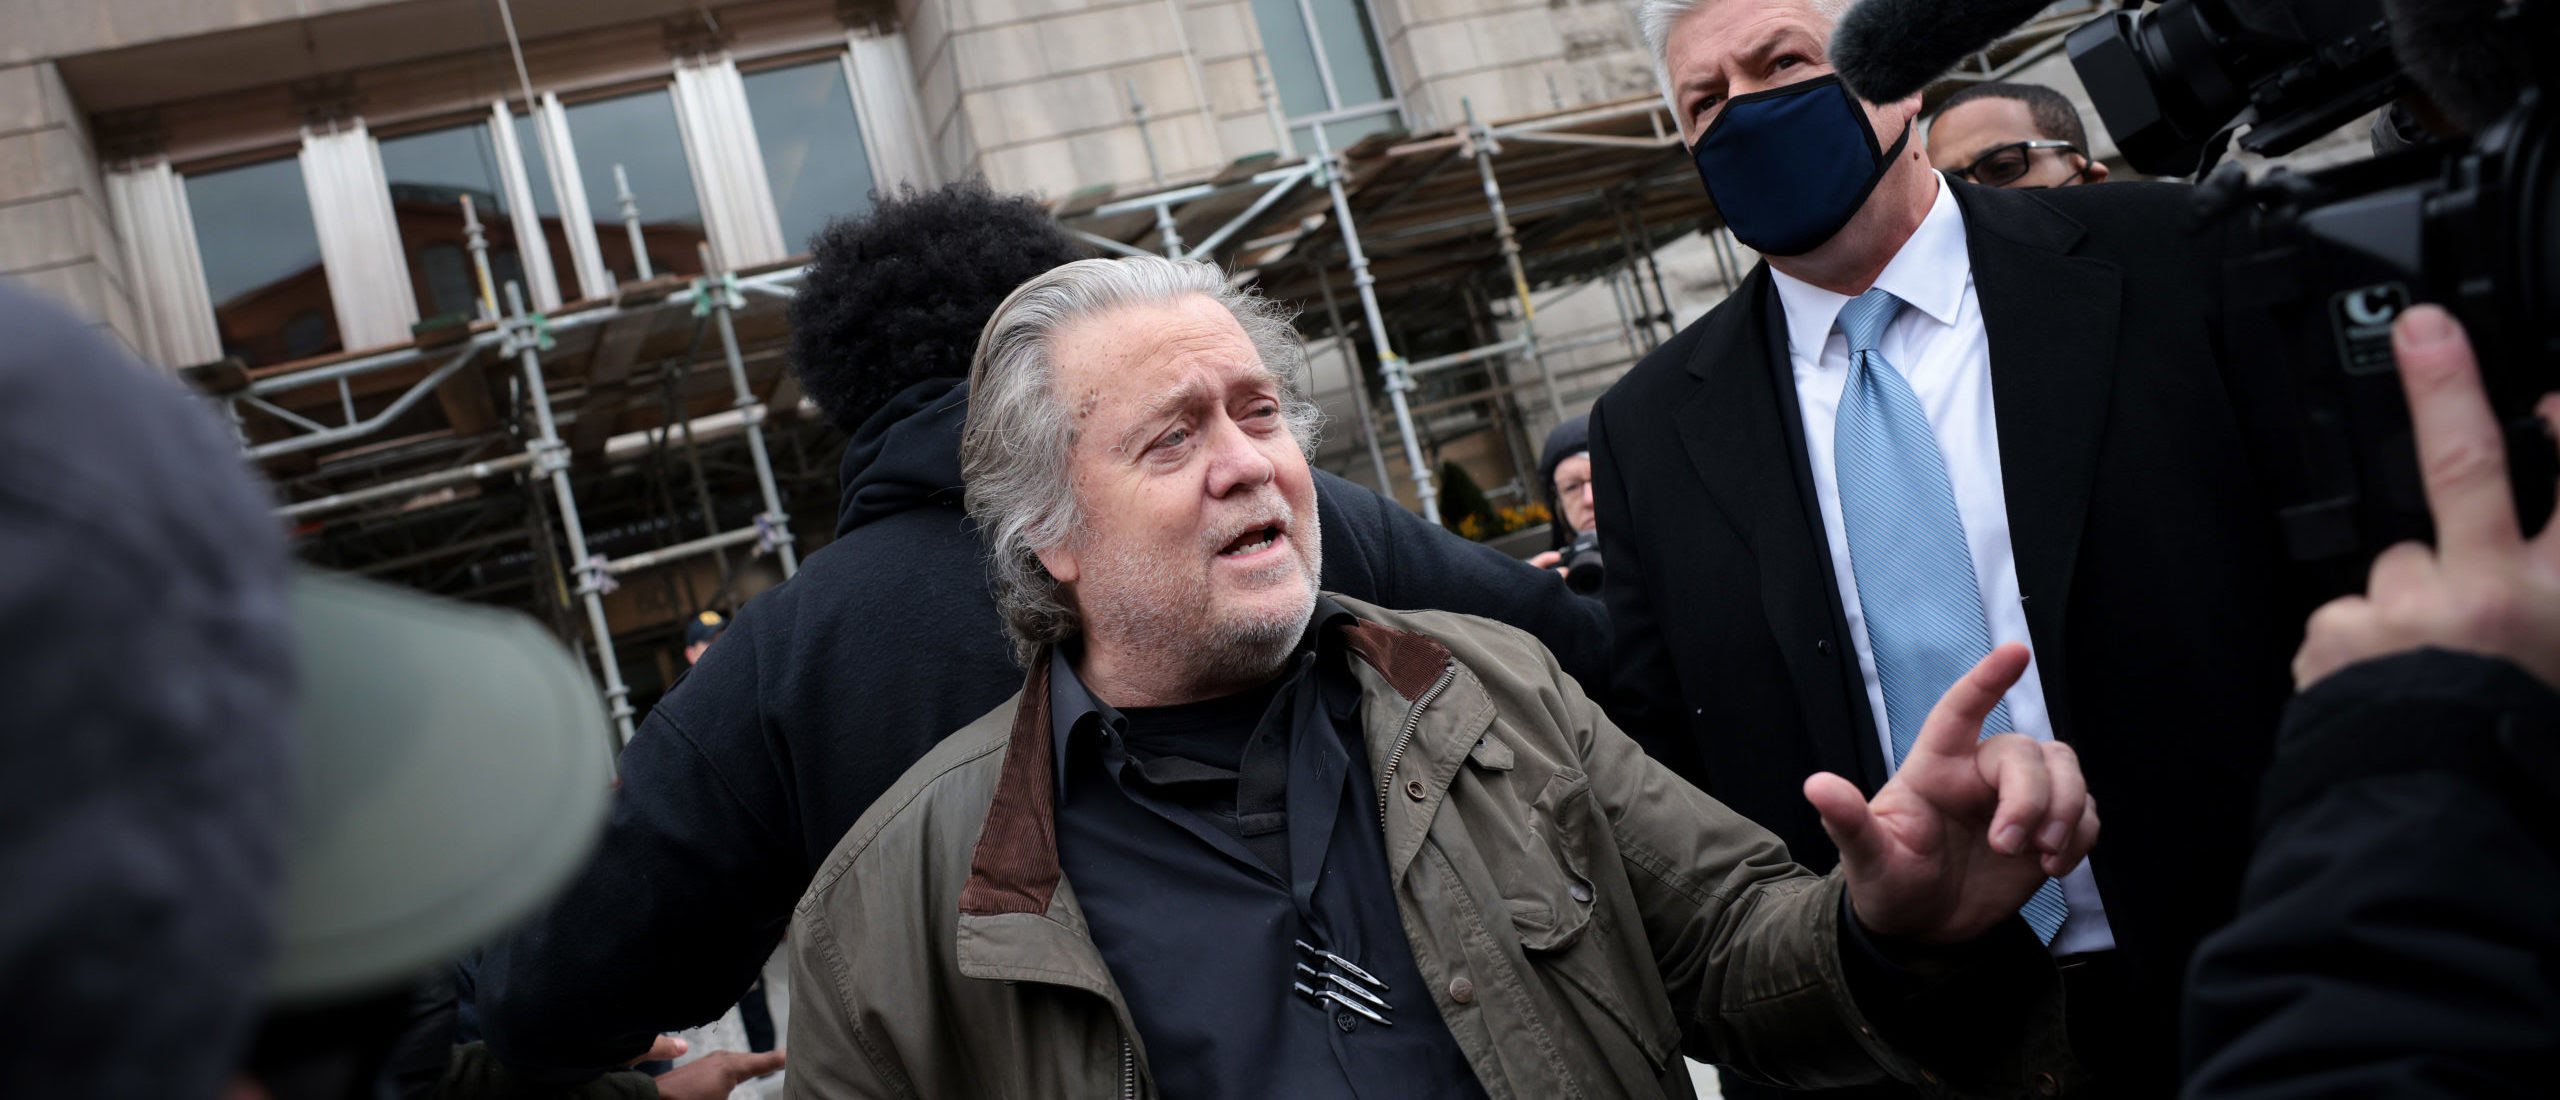 Here Are Steve Bannon’s Last Words Before Surrendering To Custody